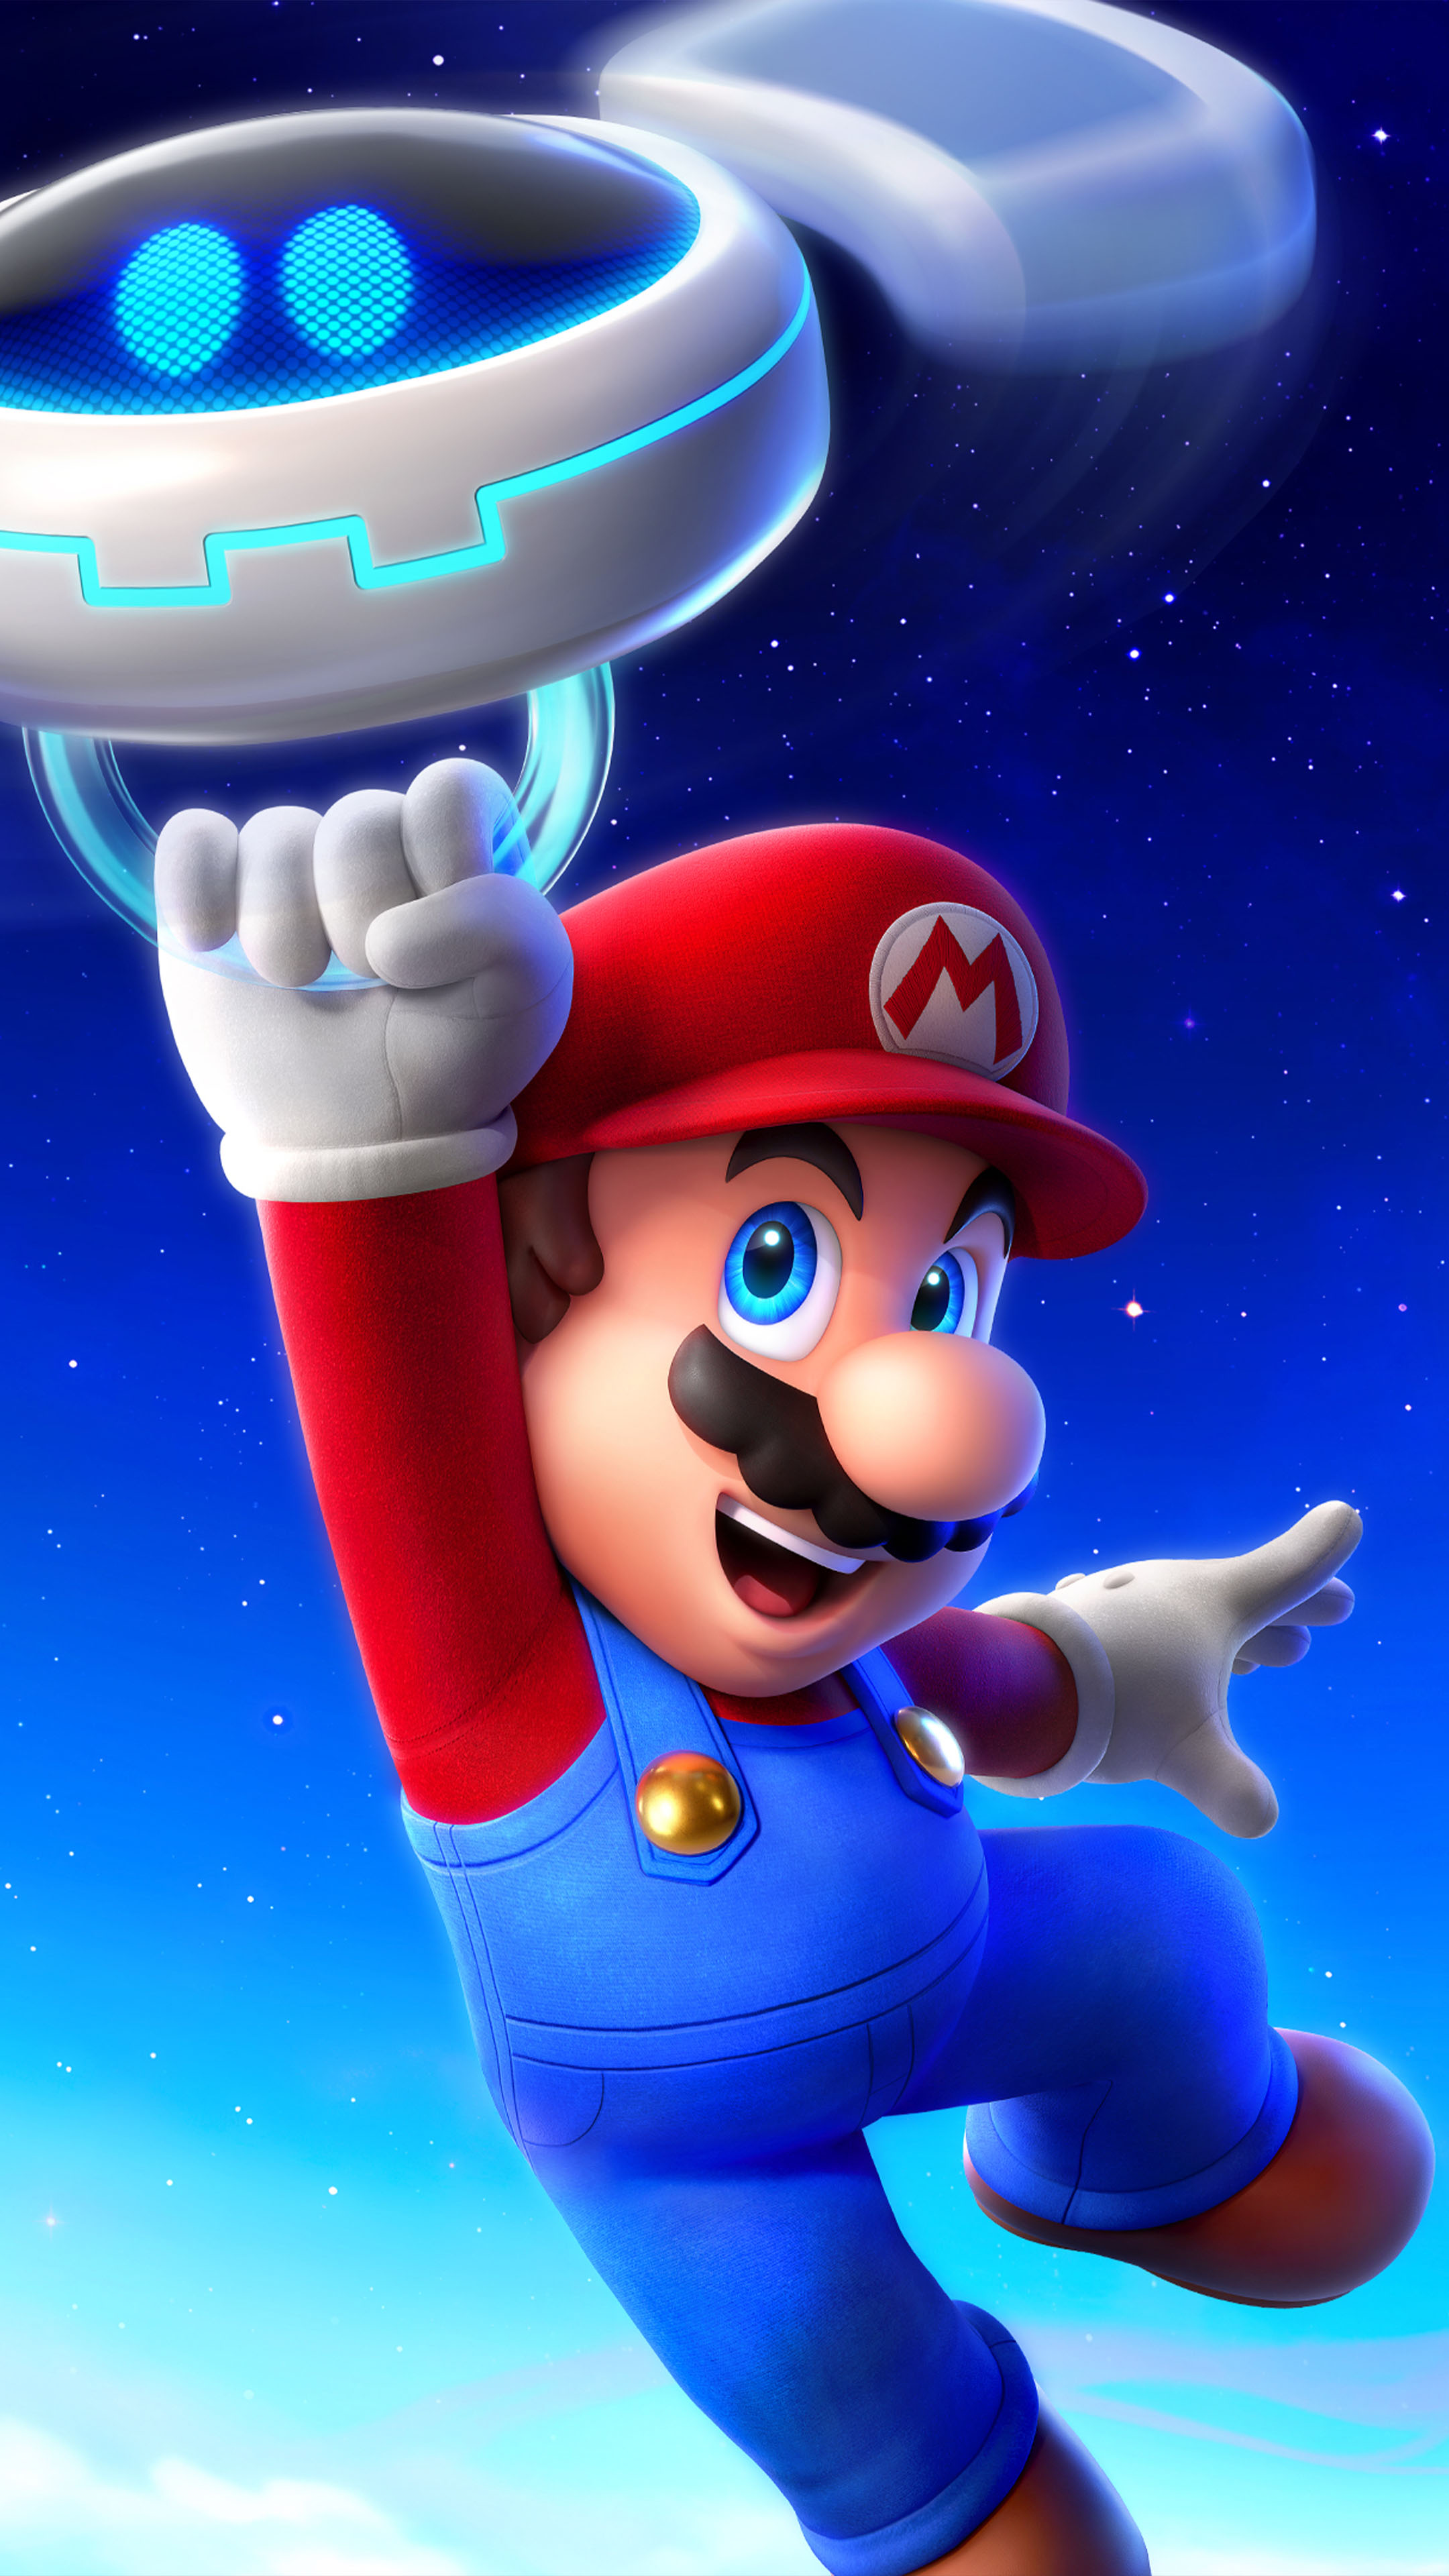 Mario Sparks of Hope (Tên trò chơi) Get ready for an exciting adventure with your favorite Italian plumber in Mario Sparks of Hope. Embark on a journey to rescue the universe from the clutches of evil and meet new friends along the way.